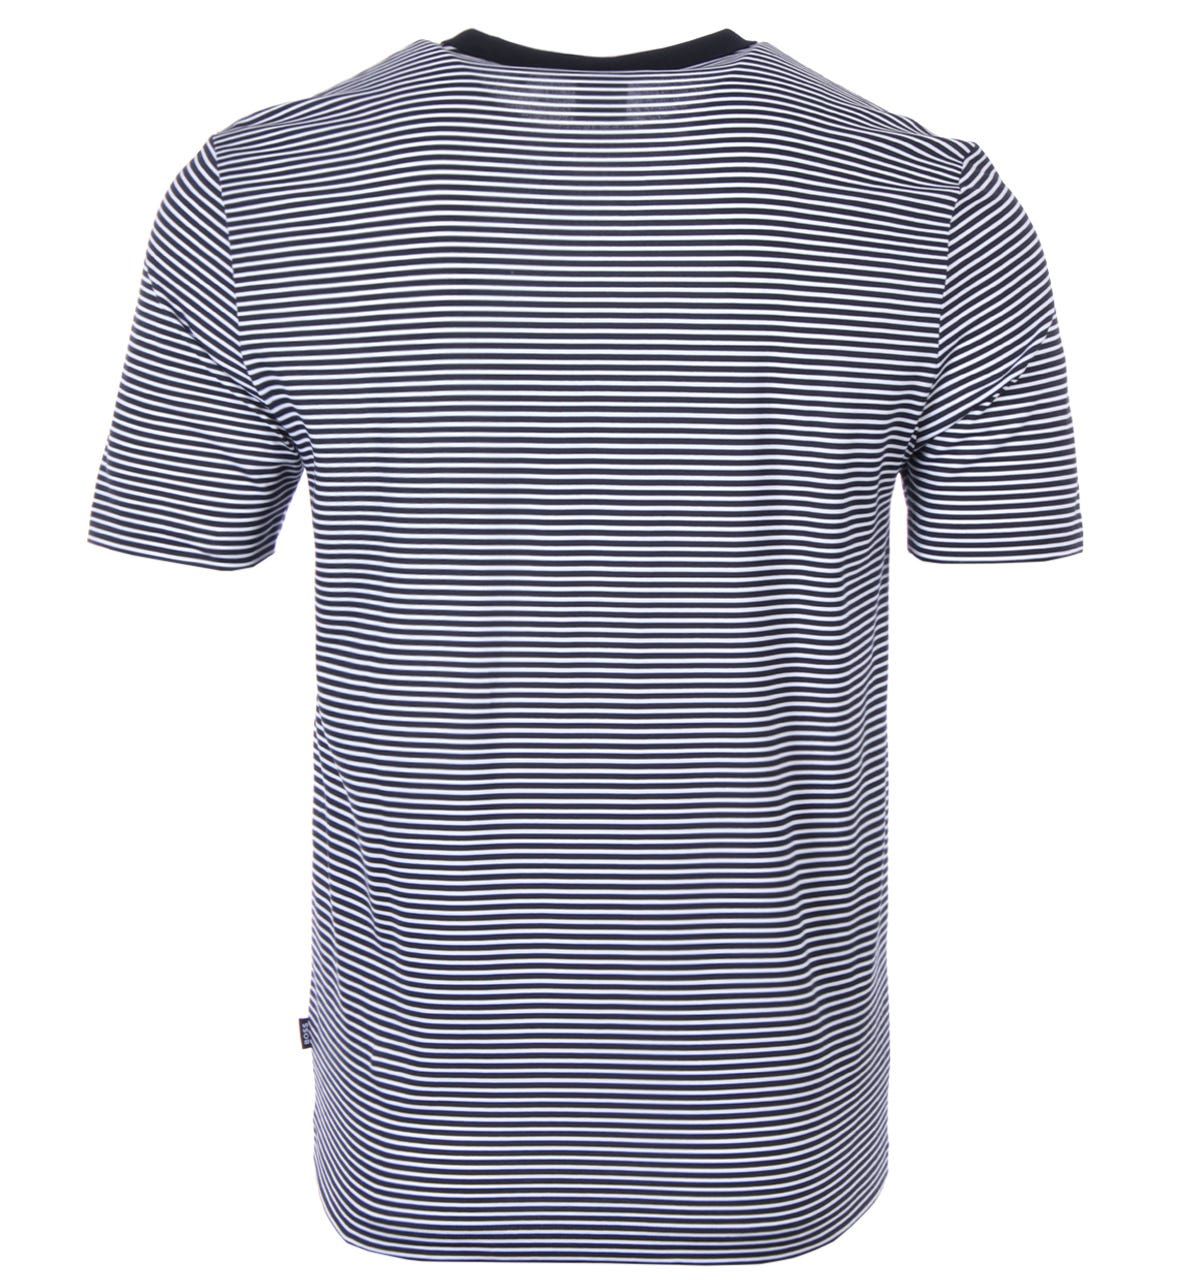 The classic Tiburt T-Shirt from BOSS has been given a makeover for the new season, crafted from sustainably sourced made in Africa cotton. Super soft and lightweight feel allowing for easy wear and styling. Featuring a classic crew neck design with short sleeves and an allover striped design, enhancing this classic essential. Finished with a large BOSS logo across the chest. Cotton made in Africa - an initiative of the Aid by Trade Foundation, one of the world's leading standards for sustainably produced cotton. Regular Fit, Sustainably Sourced Cotton, Ribbed Crew Neck, Short Sleeves , Allover Striped Design, BOSS Branding. Style & Fit: Regular Fit, Fits True to Size. Composition & Care:100% Cotton, Machine Wash.